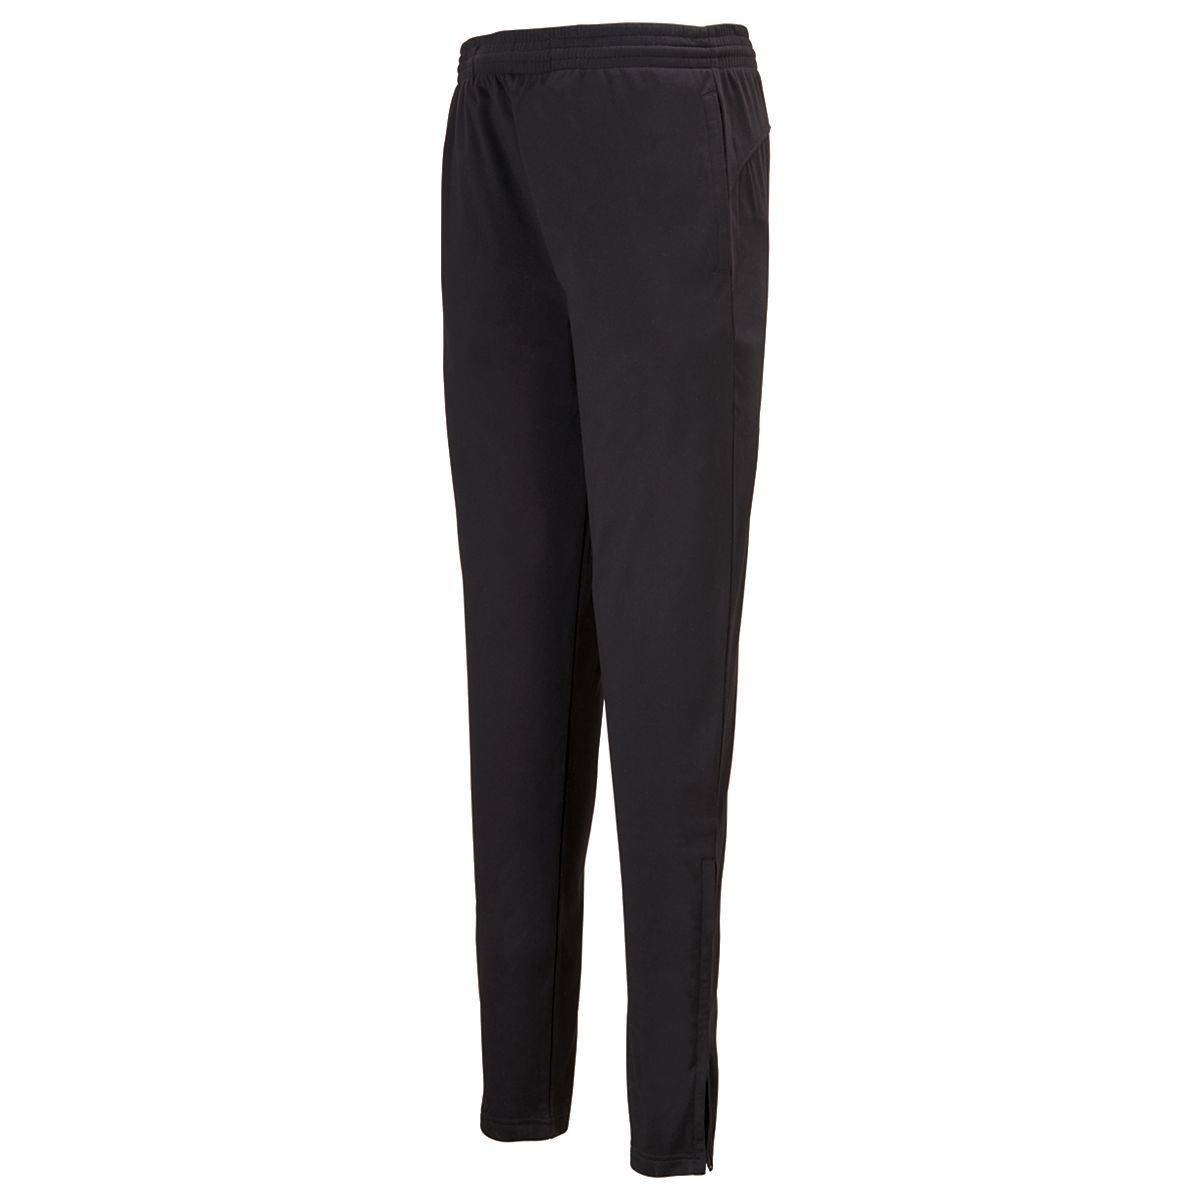 Augusta Tapered Leg Pants with Zipper Ankles